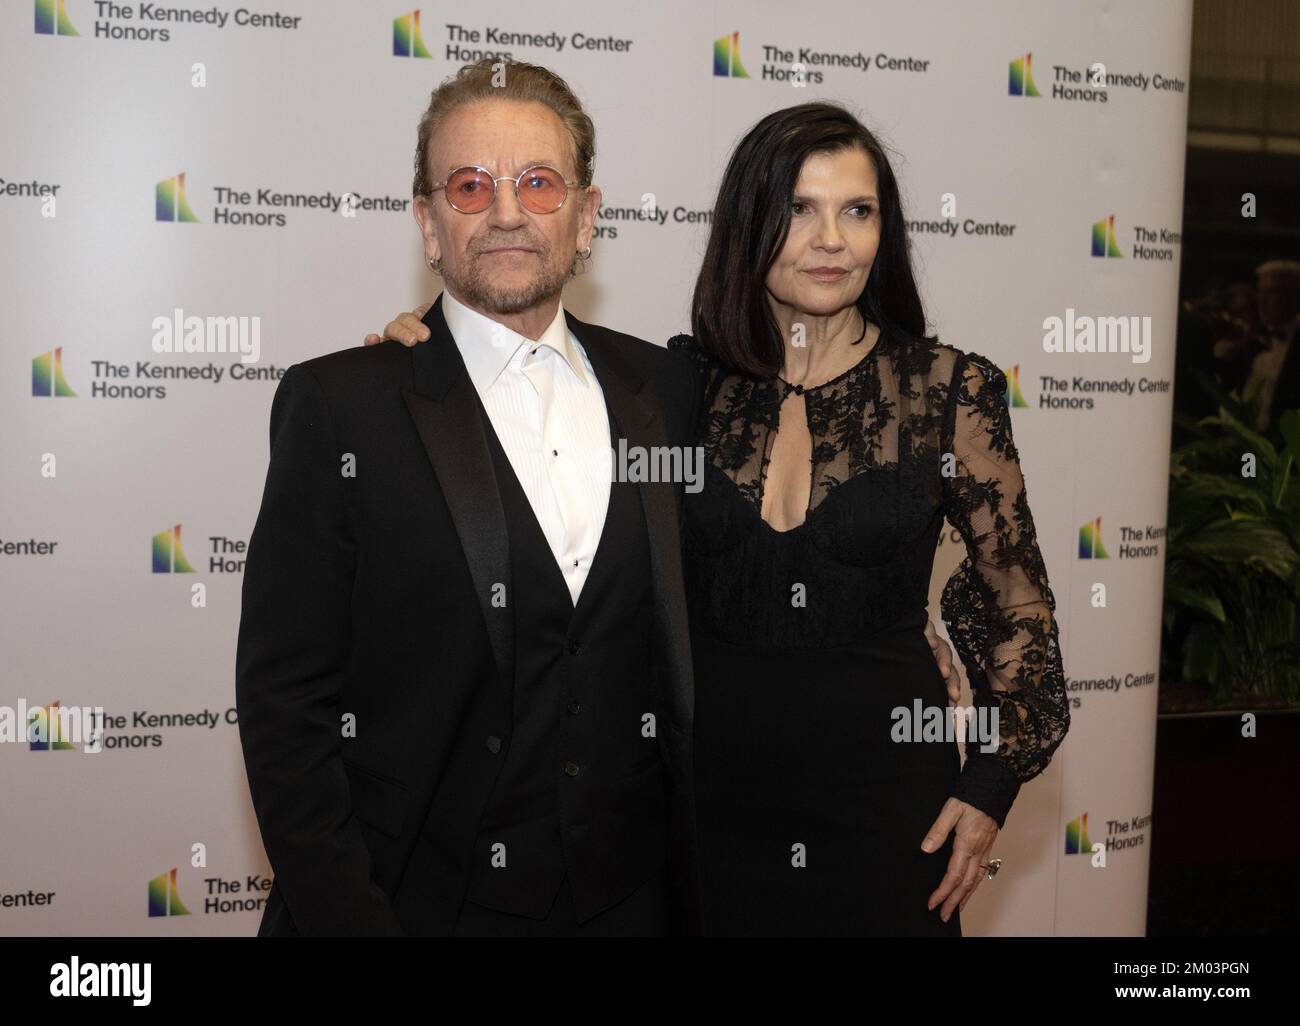 Washington DC, USA. 03rd Dec, 2022. Bono and his wife, Ali Hewson, arrive for the formal Artist's Dinner honoring the recipients of the 45th Annual Kennedy Center Honors at the Department of State in Washington, DC on Saturday, December 3, 2022. The 2022 honorees are: actor and filmmaker George Clooney contemporary Christian and pop singer-songwriter Amy Grant legendary singer of soul, Gospel, R&B, and pop Gladys Knight, Cuban-born American composer, conductor, and educator Tania León and iconic Irish rock band U2, comprised of band members Bono, The Edge, Adam Clayton, and Larry Mullen Jr. Cr Stock Photo